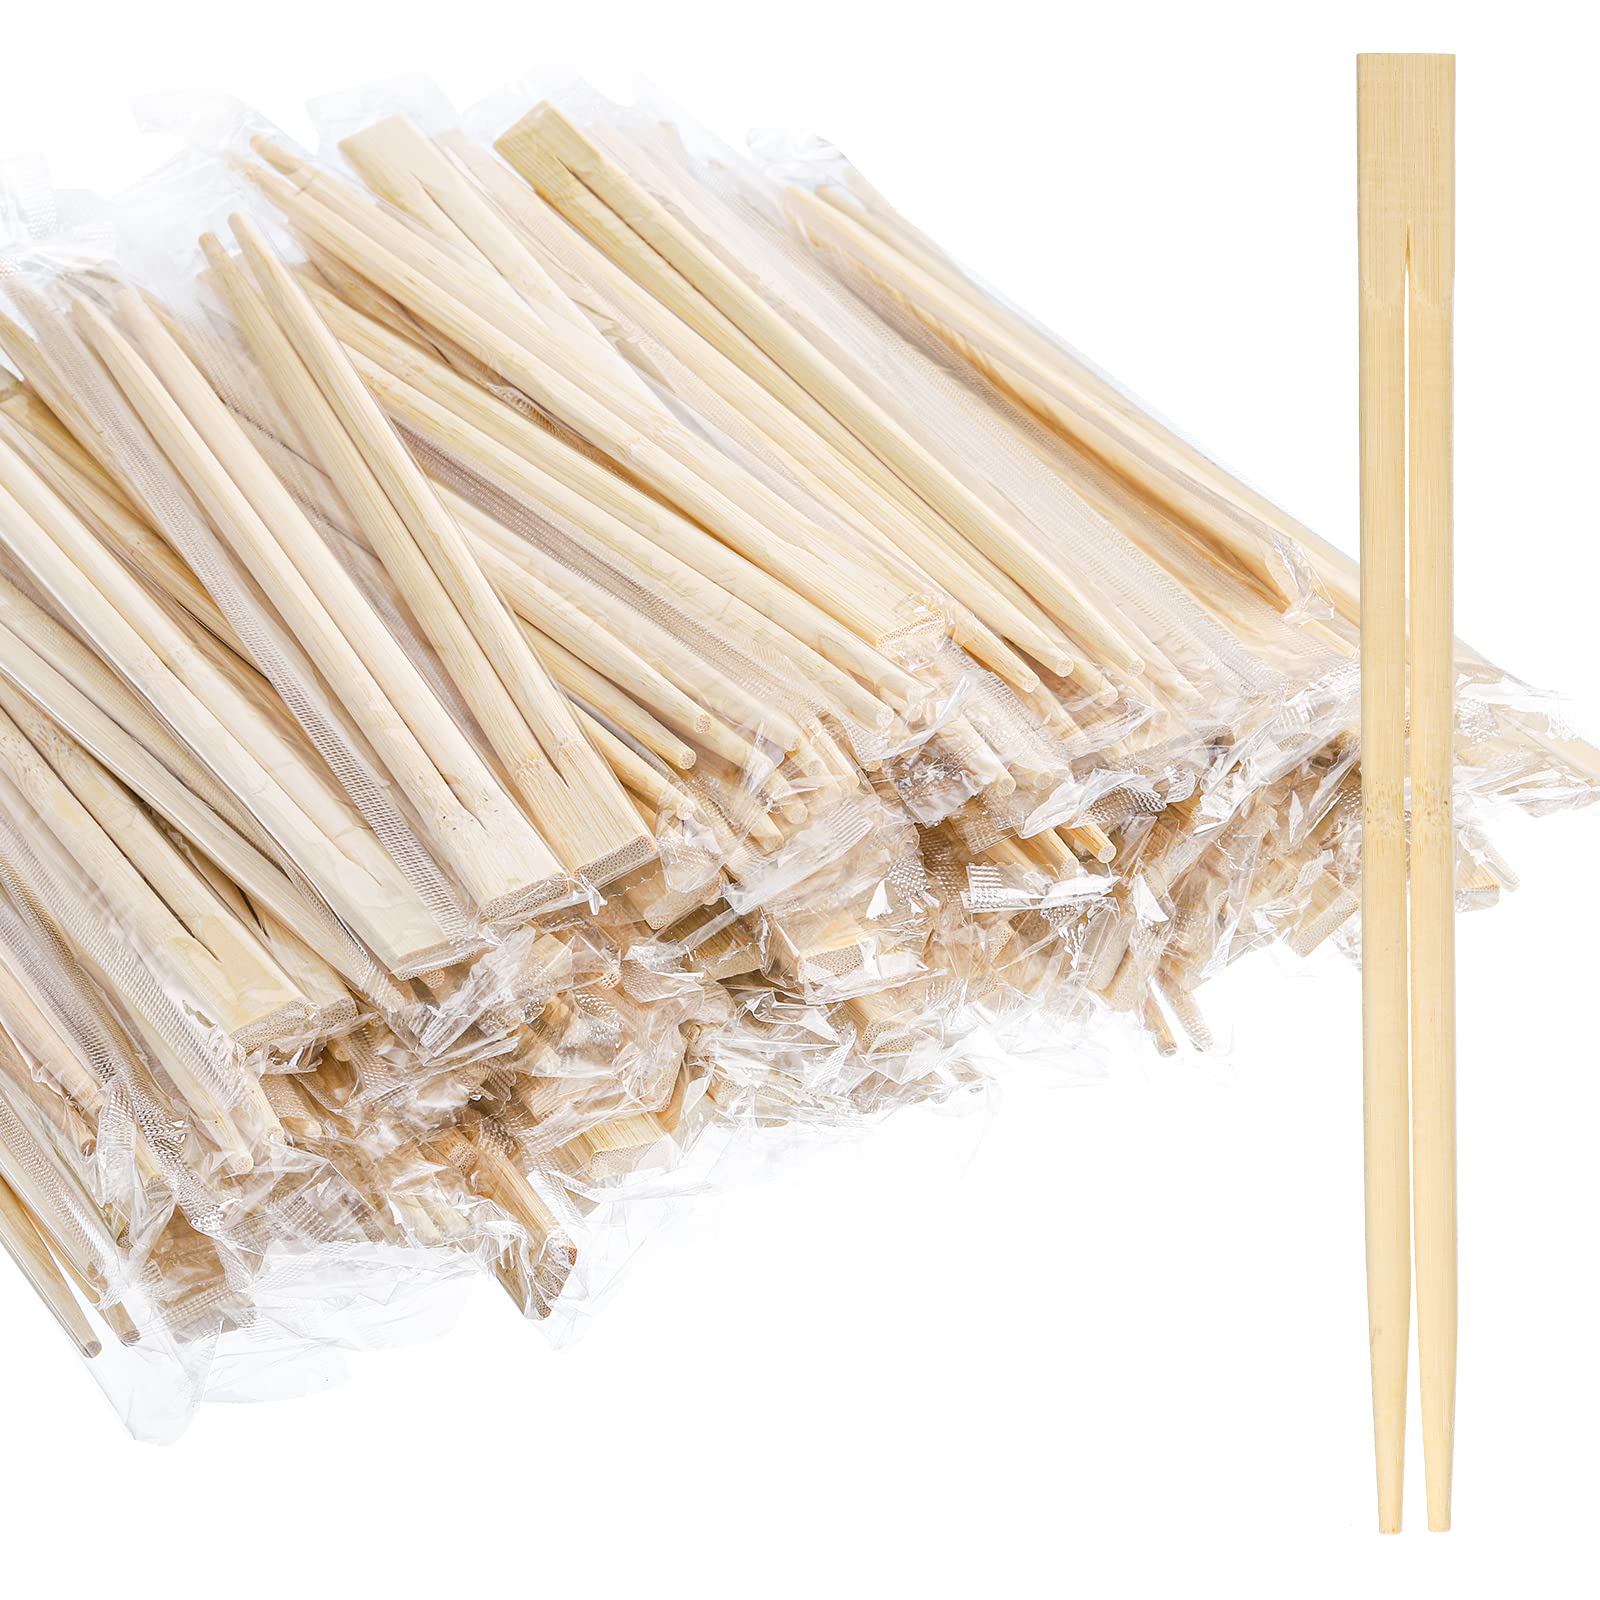 Hiceeden 360 Pairs Disposable Bamboo Chopsticks, Individually Wrapped Chopstick Bulk for Take-Out Orders, Restaurants, Picnics, Clear Sleeve Film